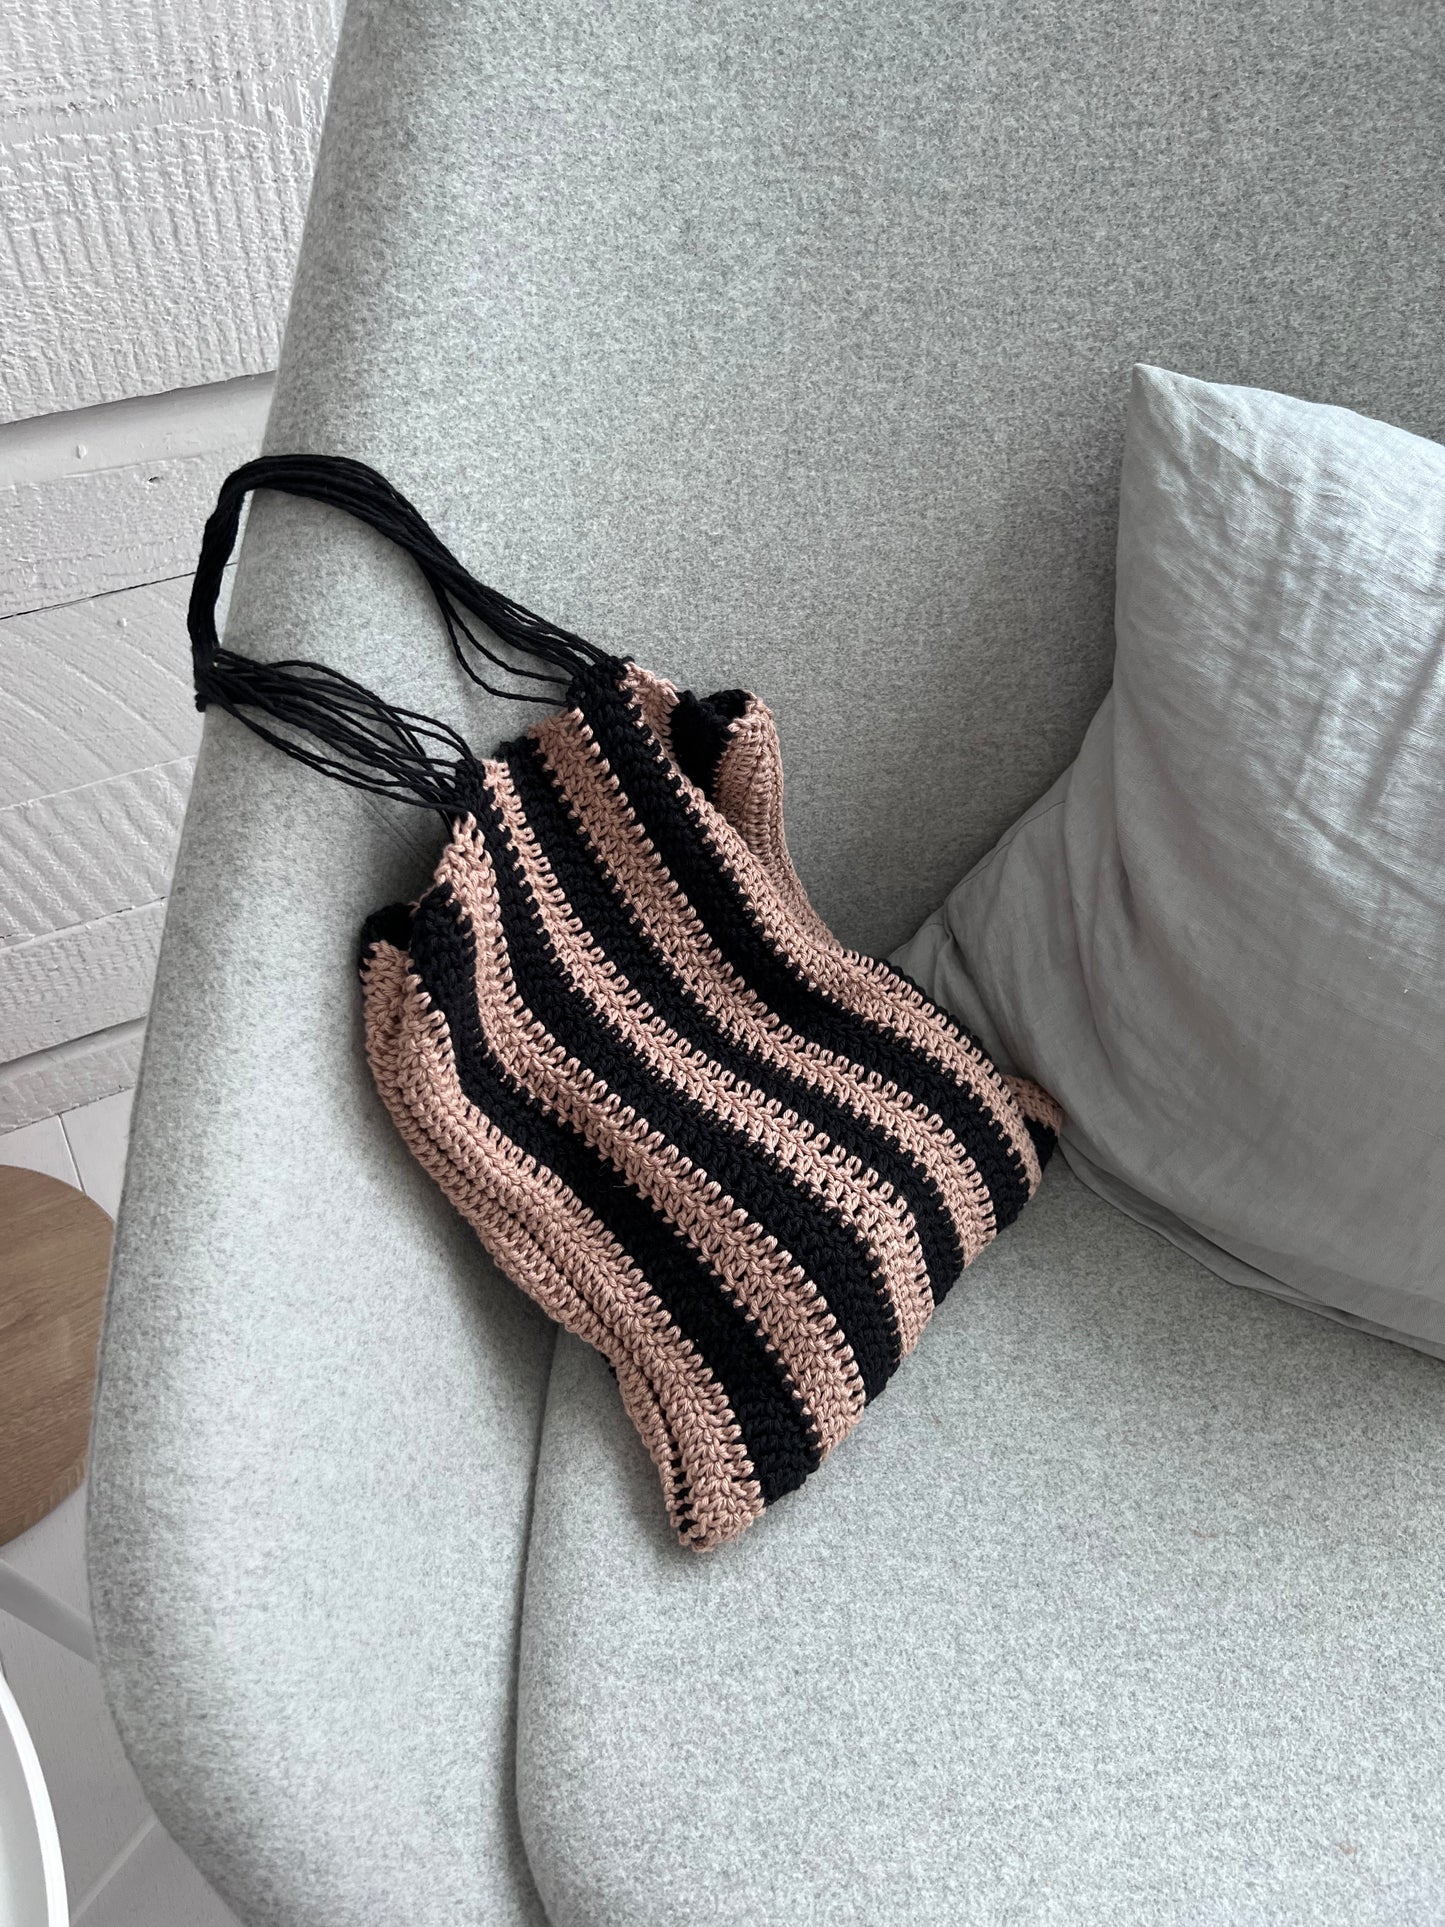 The Striped Bag Pattern